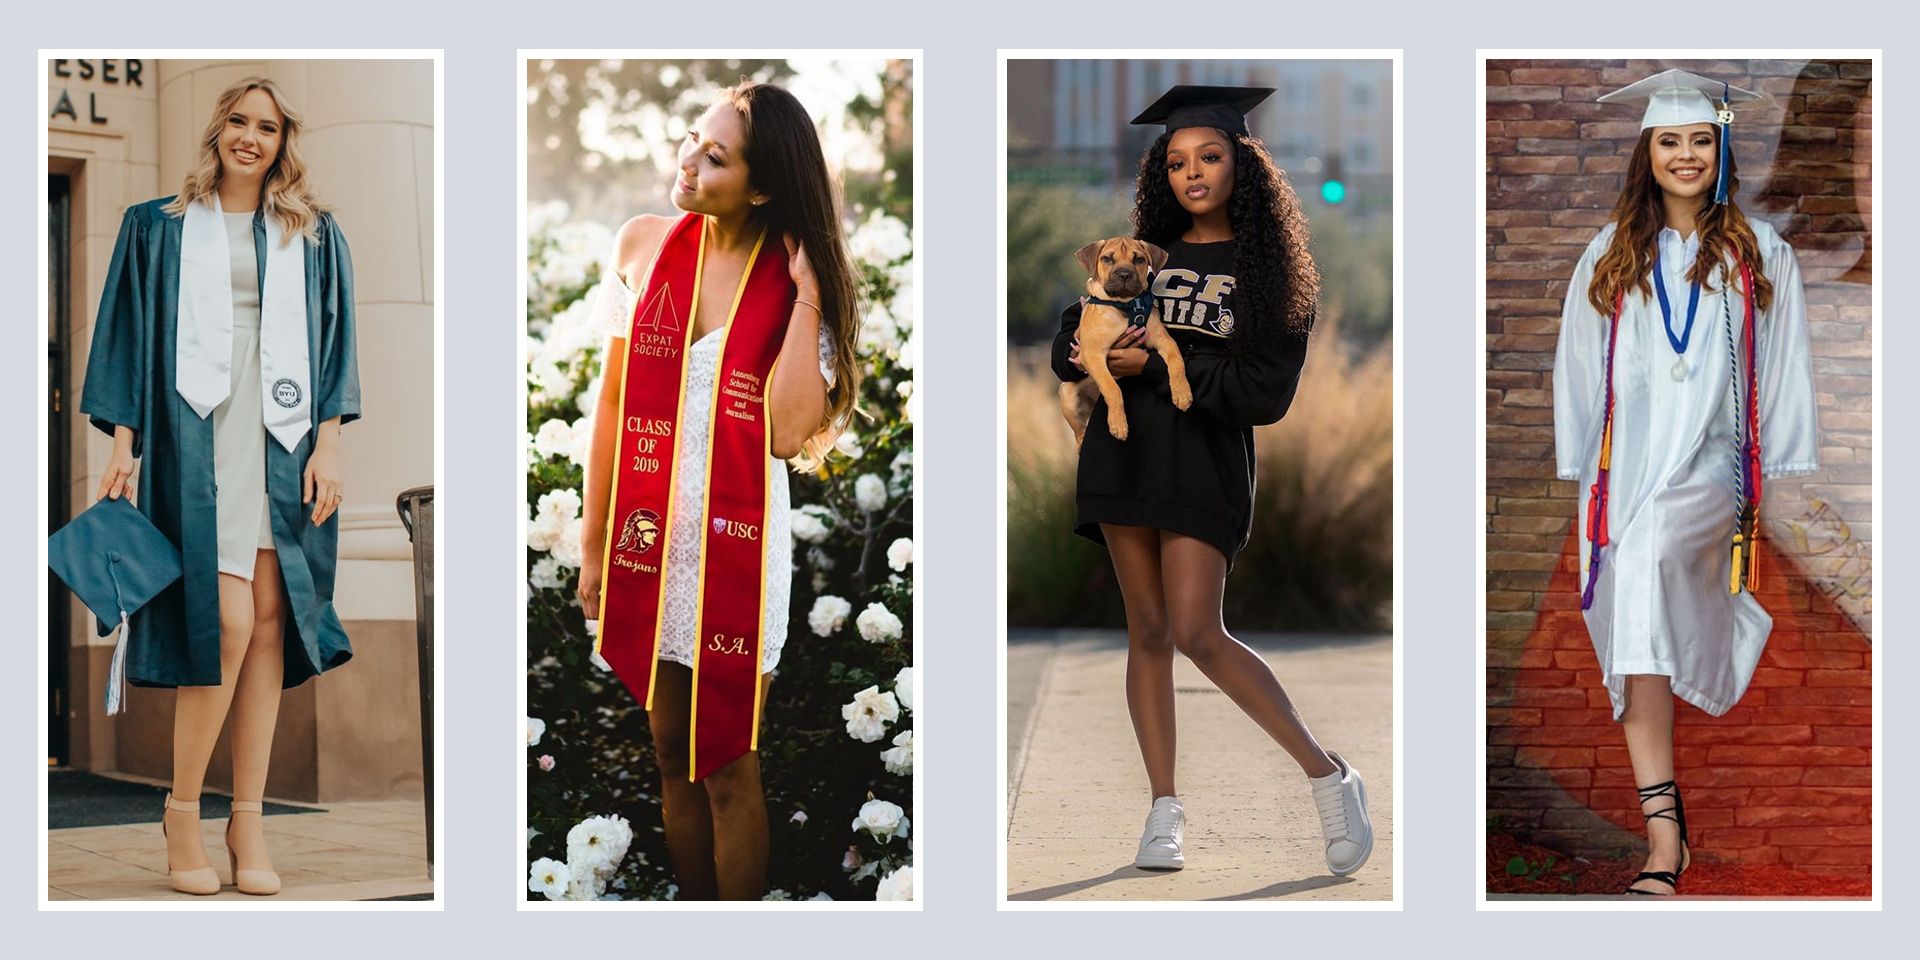 6 Tips to Have the Best Graduation Photoshoot | Flytographer